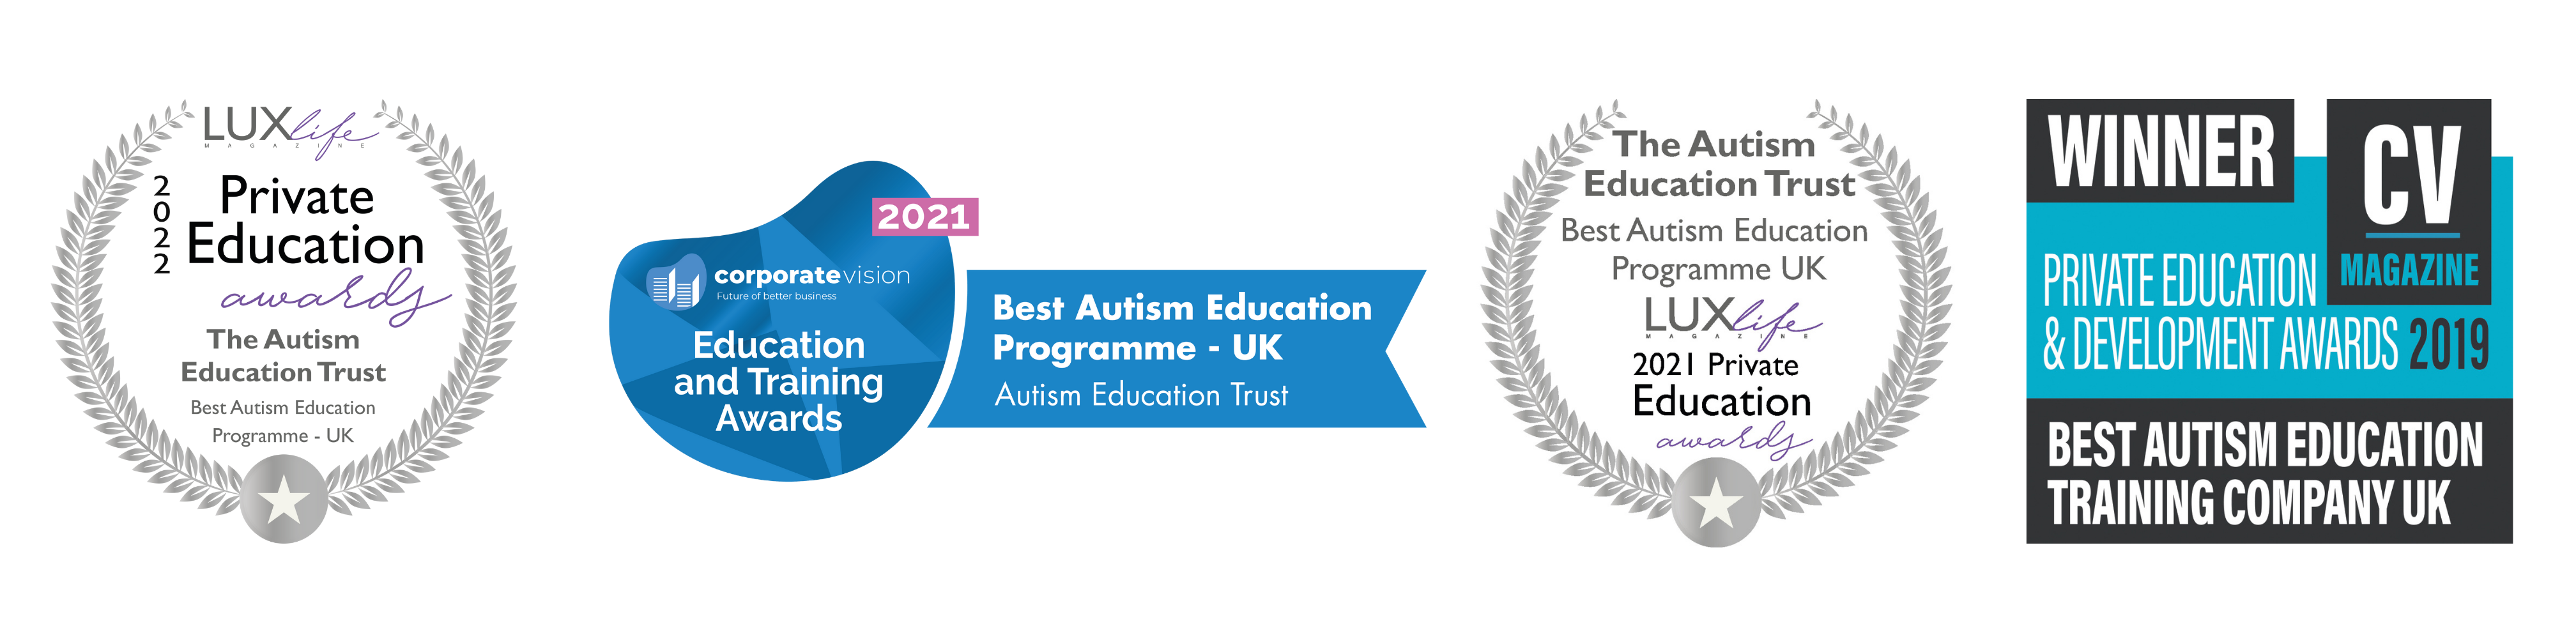 AET Awards logos, Private Education Awards: Best Autism Education Programme 2022, Education and Training Awards: Best Autism Education Programme UK 2021, Private Education Awards: Best Autism Education Programme 2021, Private Education and development awards: Best Autism Education Training Company 2019